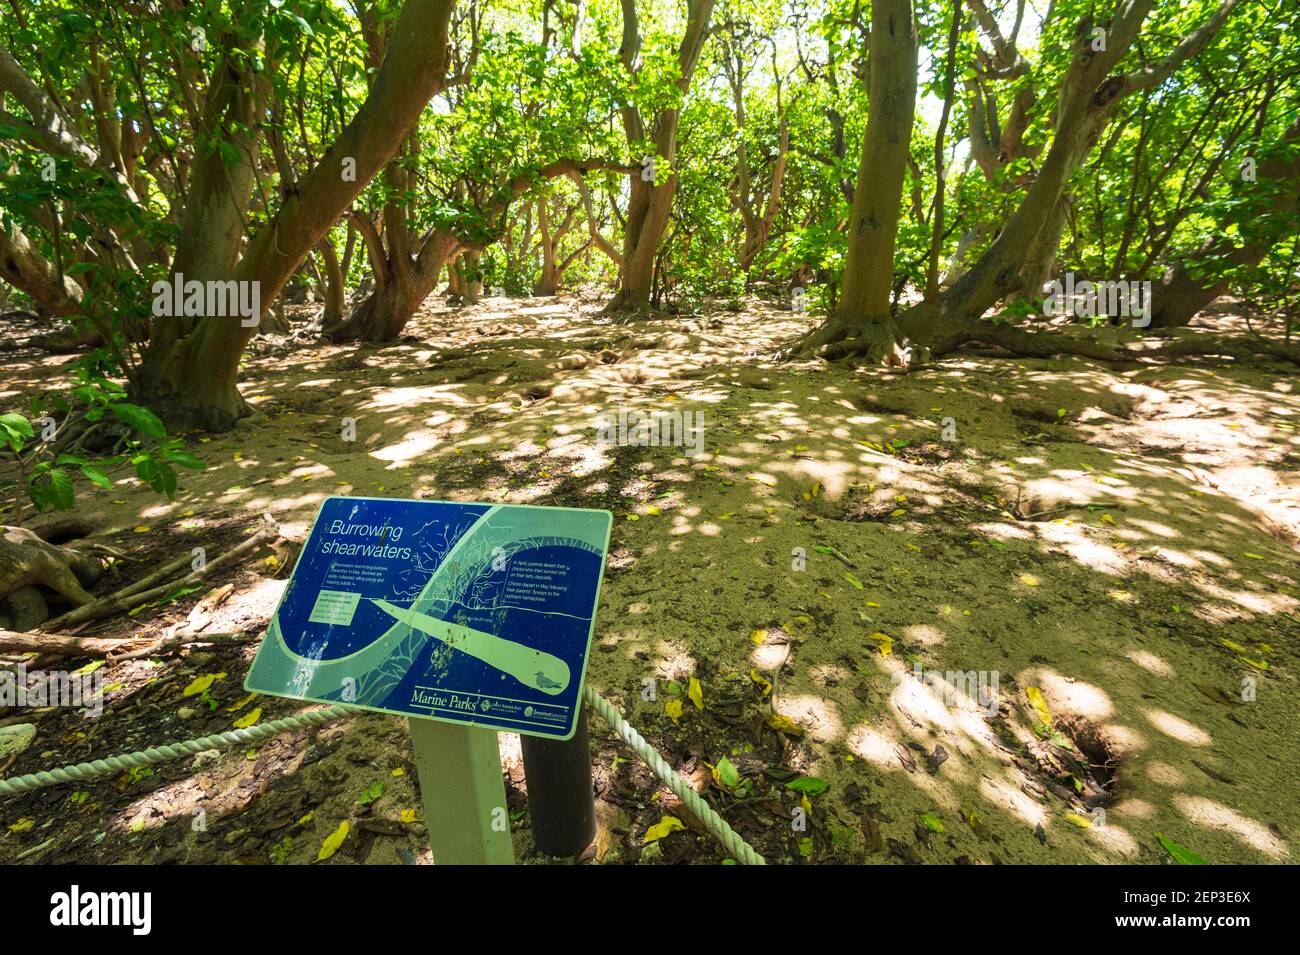 Ground in the Pisonia forest where Shearwaters burrow themselves during the nesting season, Lady Musgrave Island, Southern Great Barrier Reef, Queensl Stock Photo